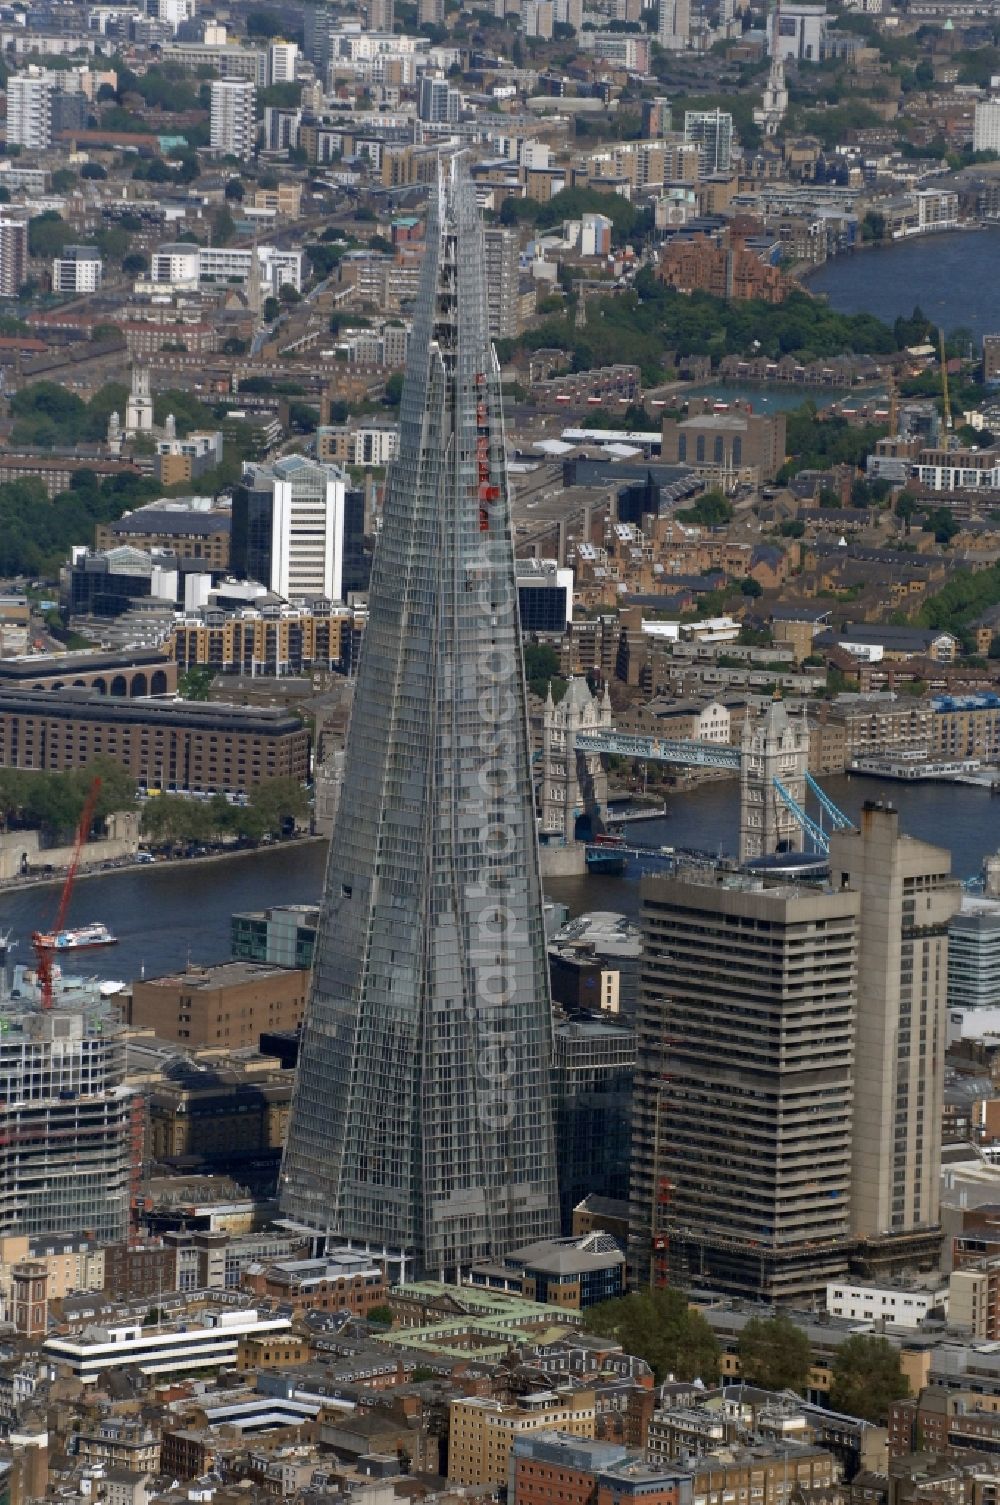 London from the bird's eye view: View The Shard - Europe's tallest building. The high-rise occurs at the London Bridge Station. The Shard London Bridge (formerly known as London Bridge Tower, and Shard of Glass) is a skyscraper under construction in London, which will be on its completion as it stood at 310 meters, the second tallest building in Europe